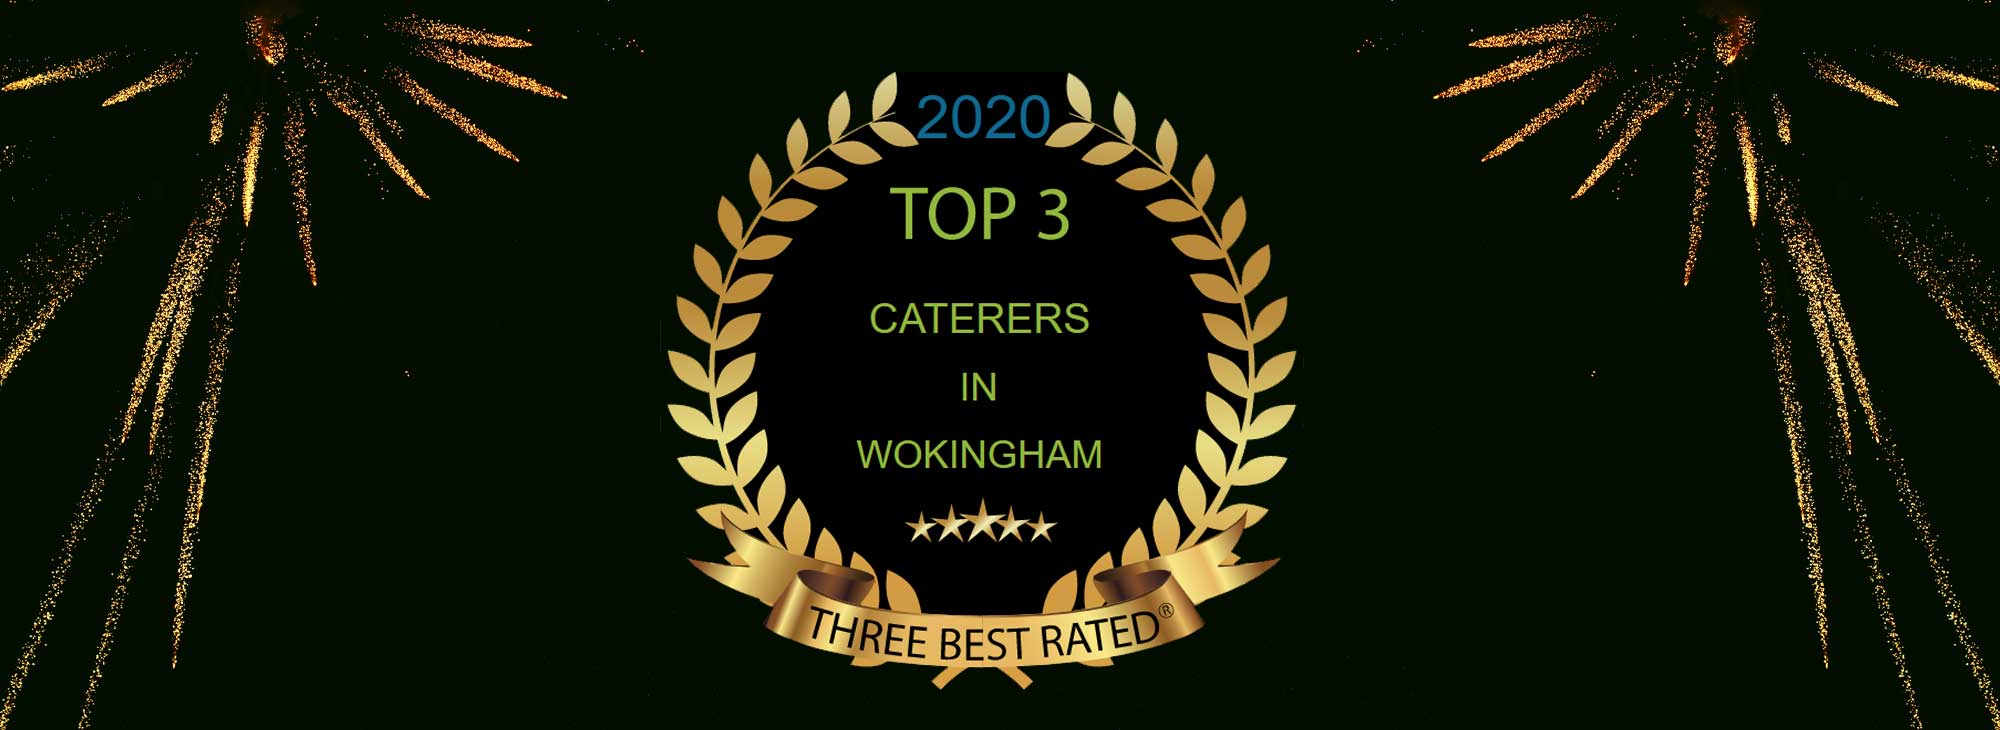 Voted top 3 caterers by the food standards agency